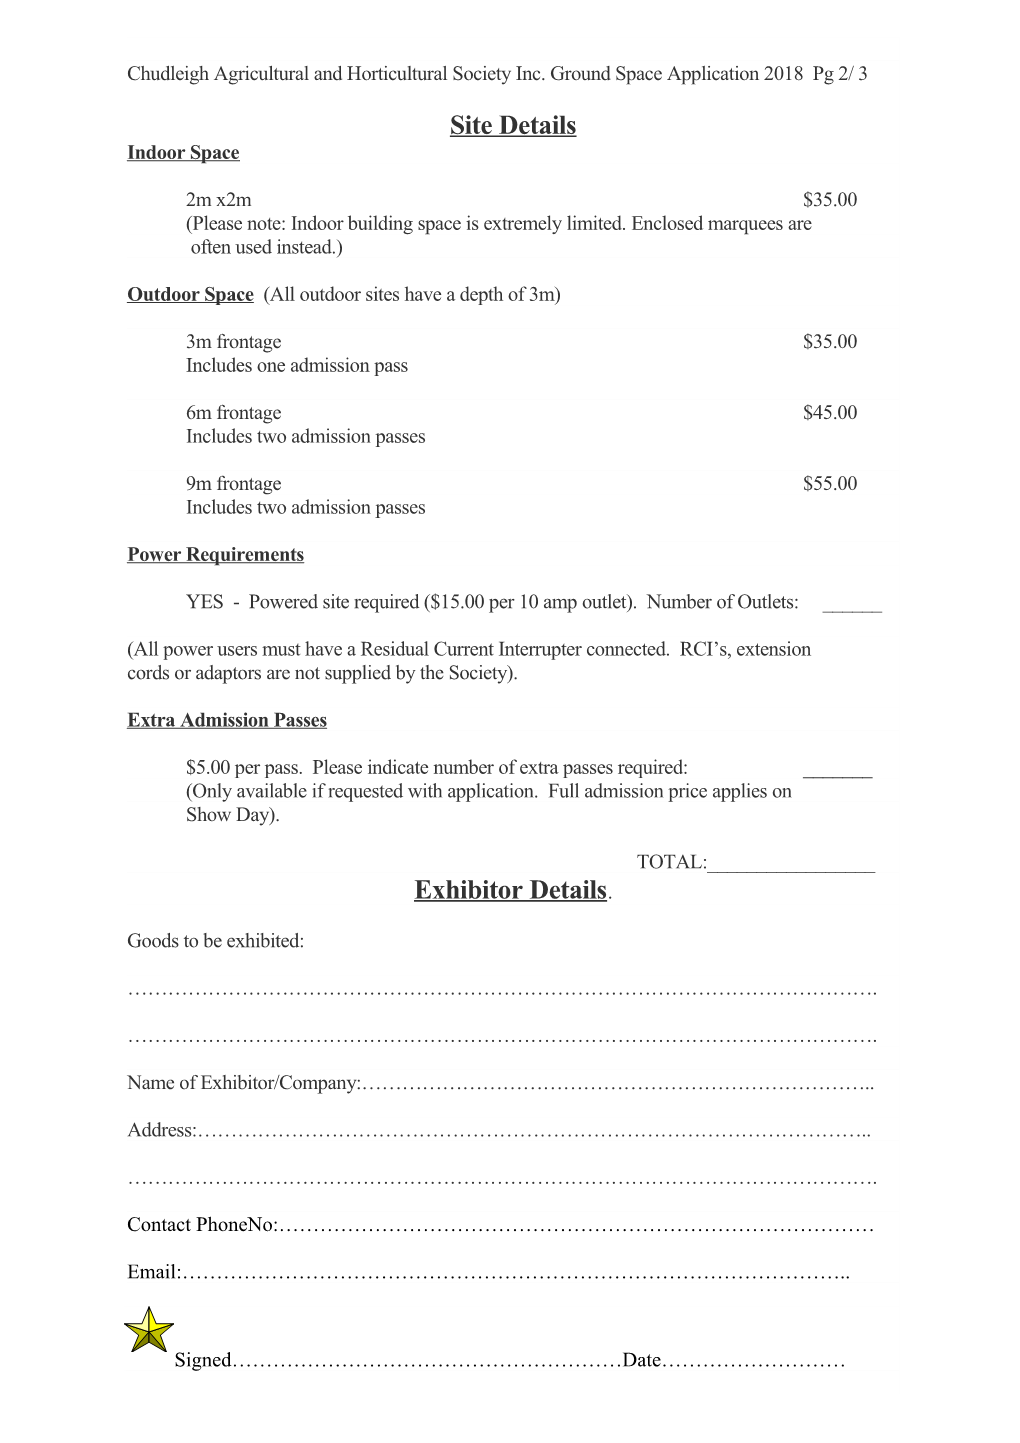 Chudleigh Agricultural and Horticultural Society Inc. Ground Space Application 2018 Pg 1/ 3